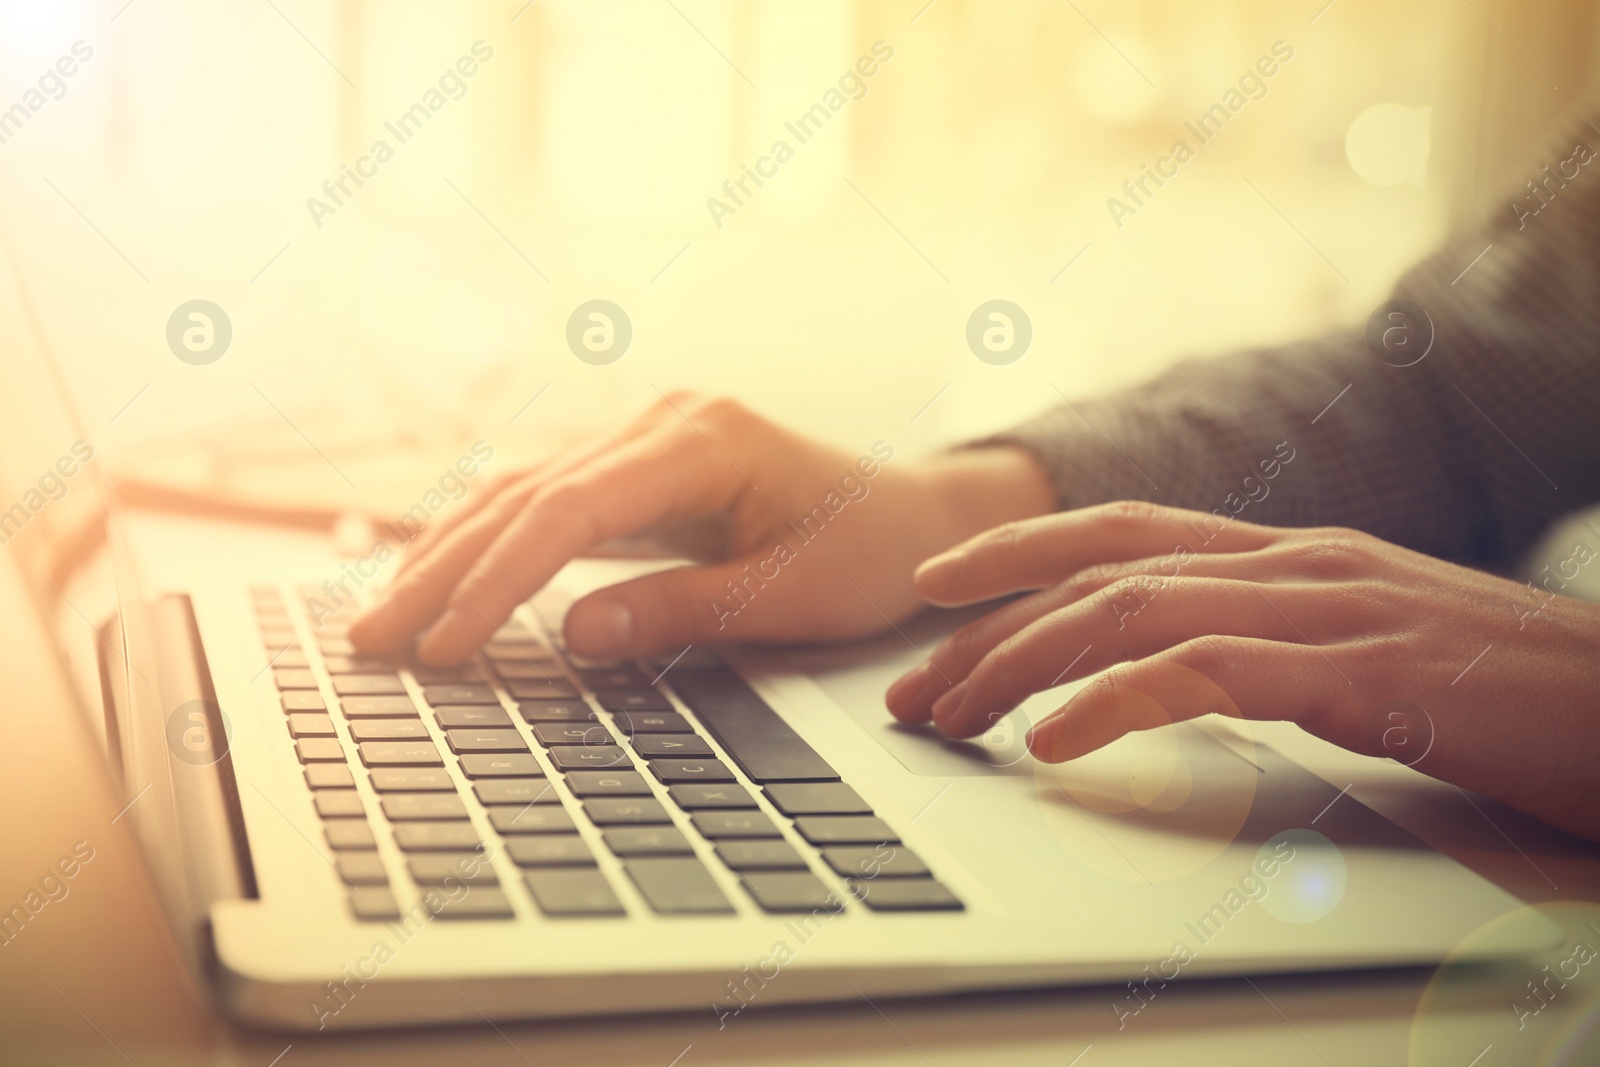 Image of Woman working with laptop at table indoors, closeup